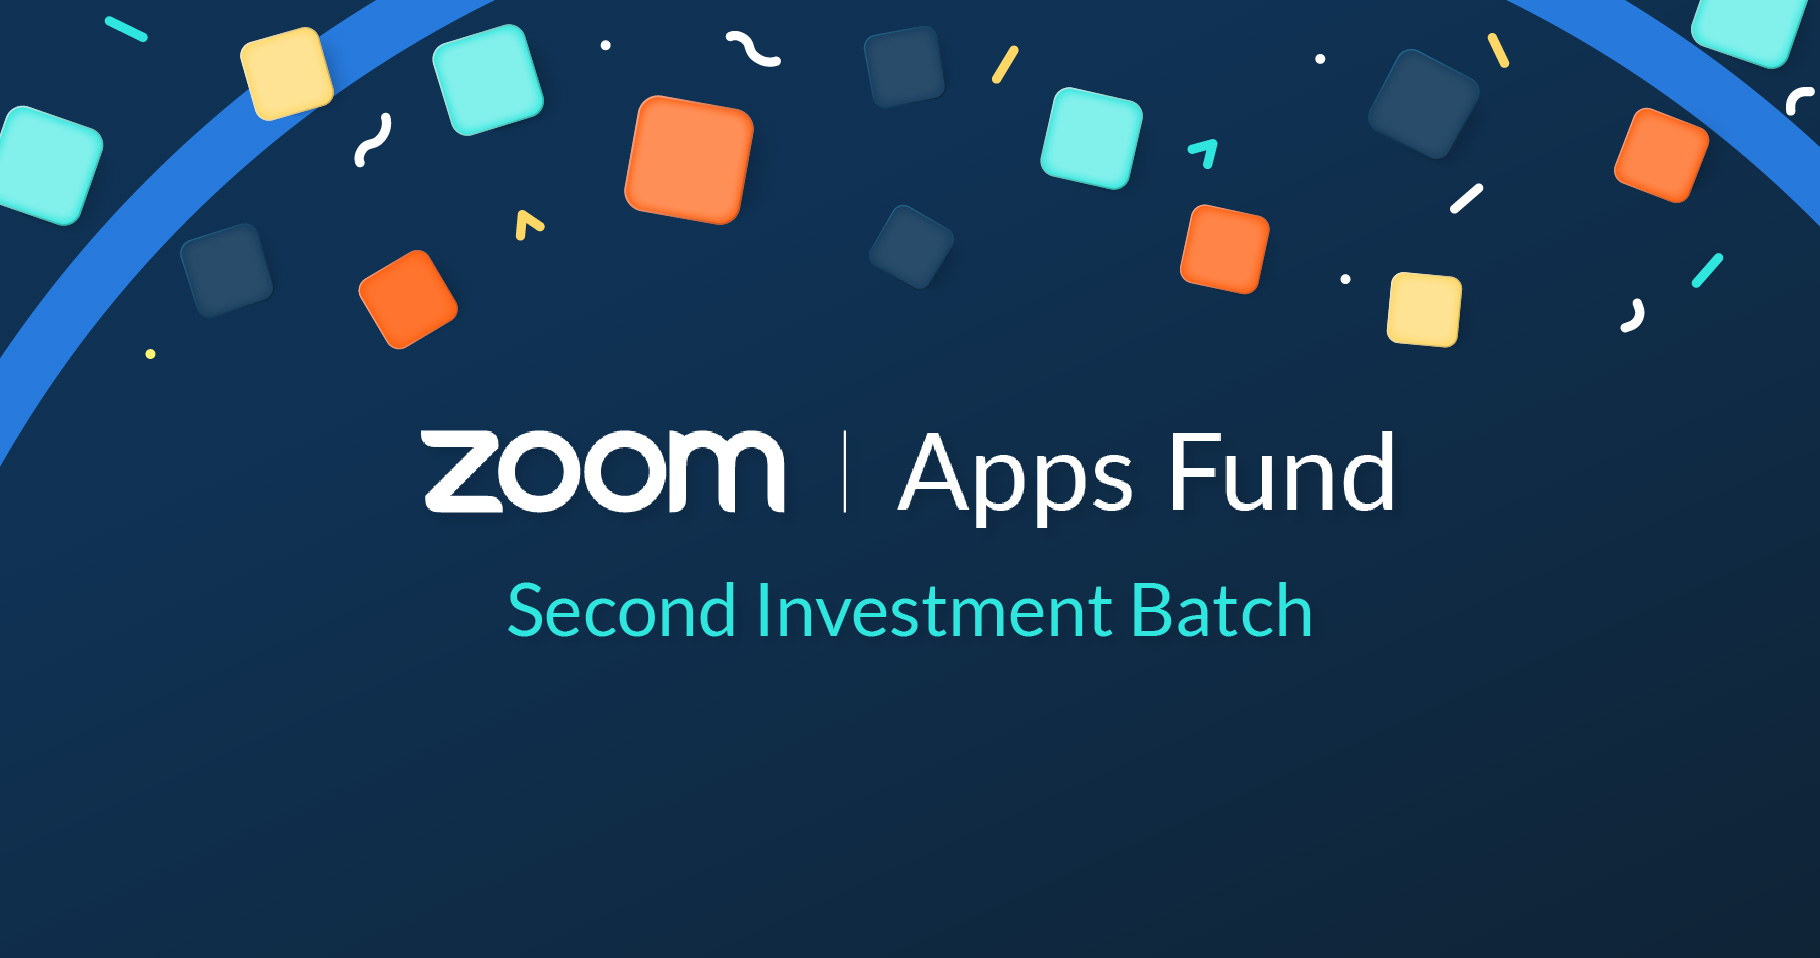 13 Companies Receive Funding As Part Of Second Batch Of Zoom Apps Fund Investments